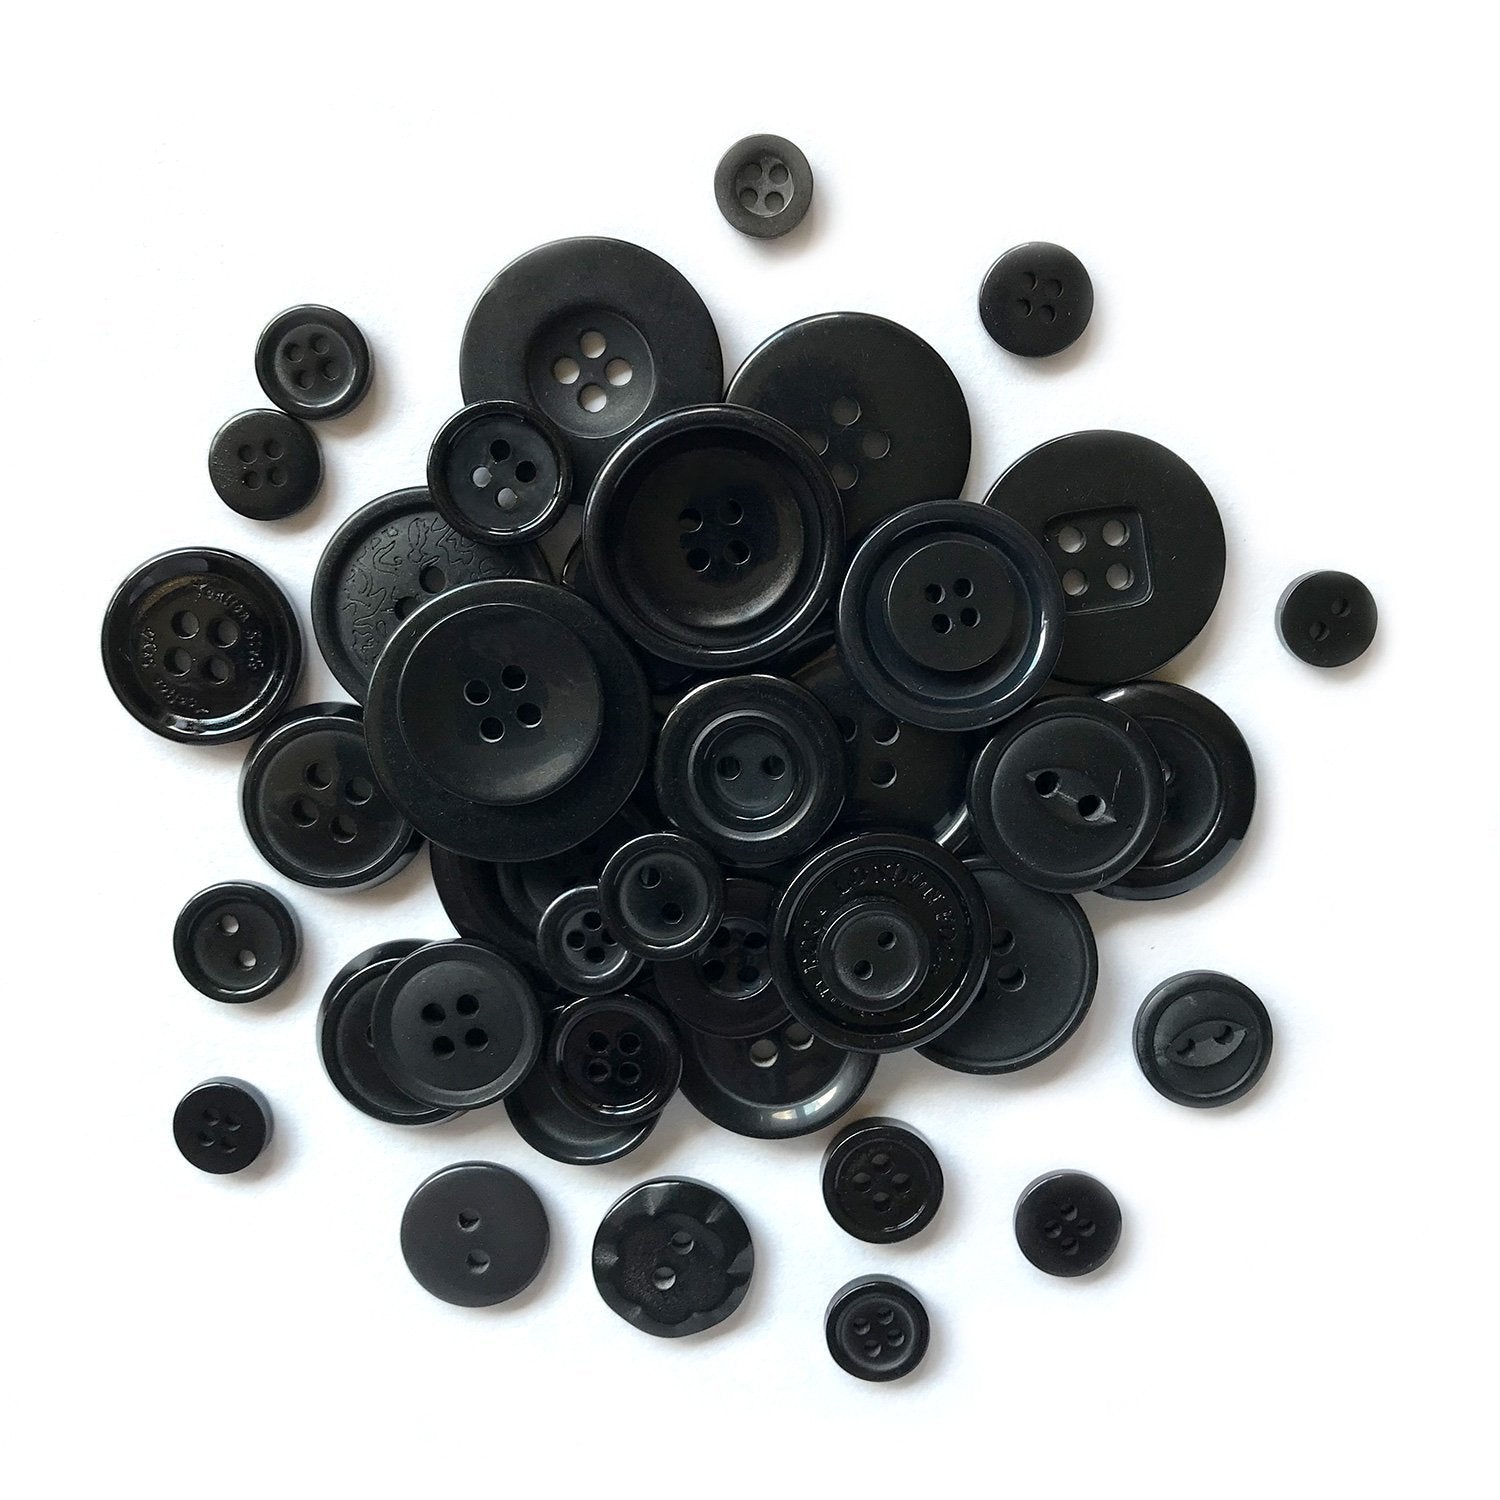  Black Buttons Sewing Button 4 Hole Plastic Button Round Buttons  Black 18L Pack of 12 : Arts, Crafts & Sewing